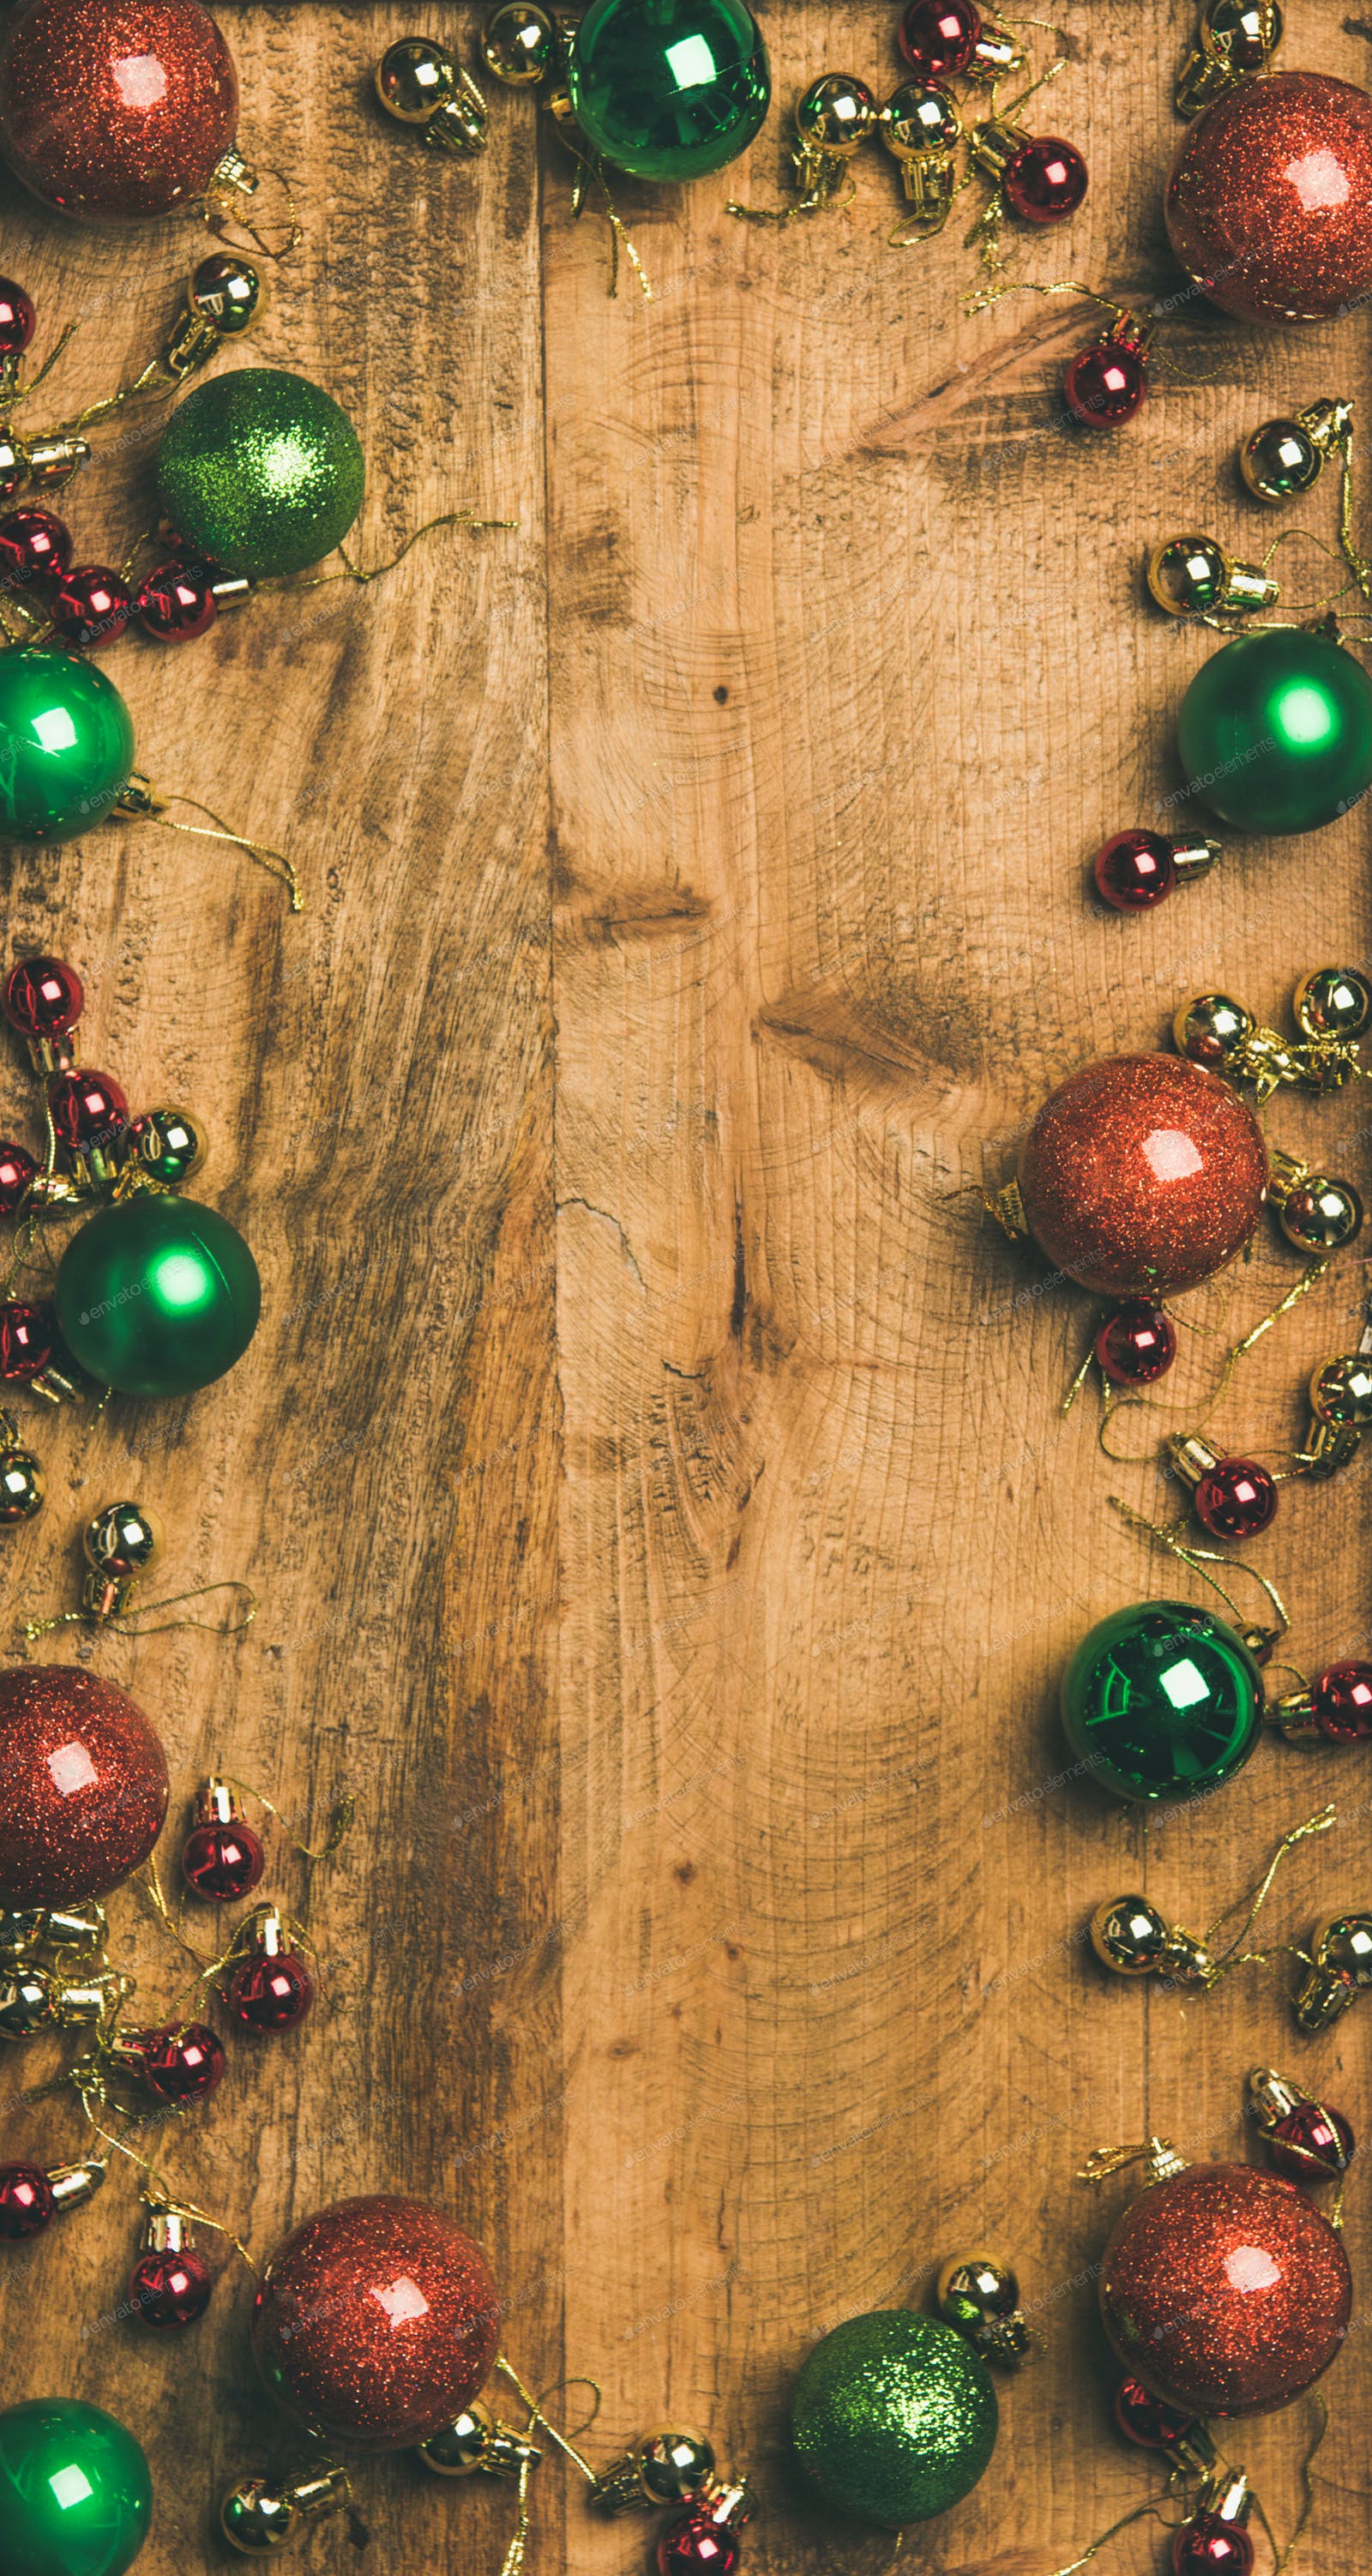 Christmas tree decoration balls on wooden background, vertical composition photo by sonyakamoz on Envato Elements